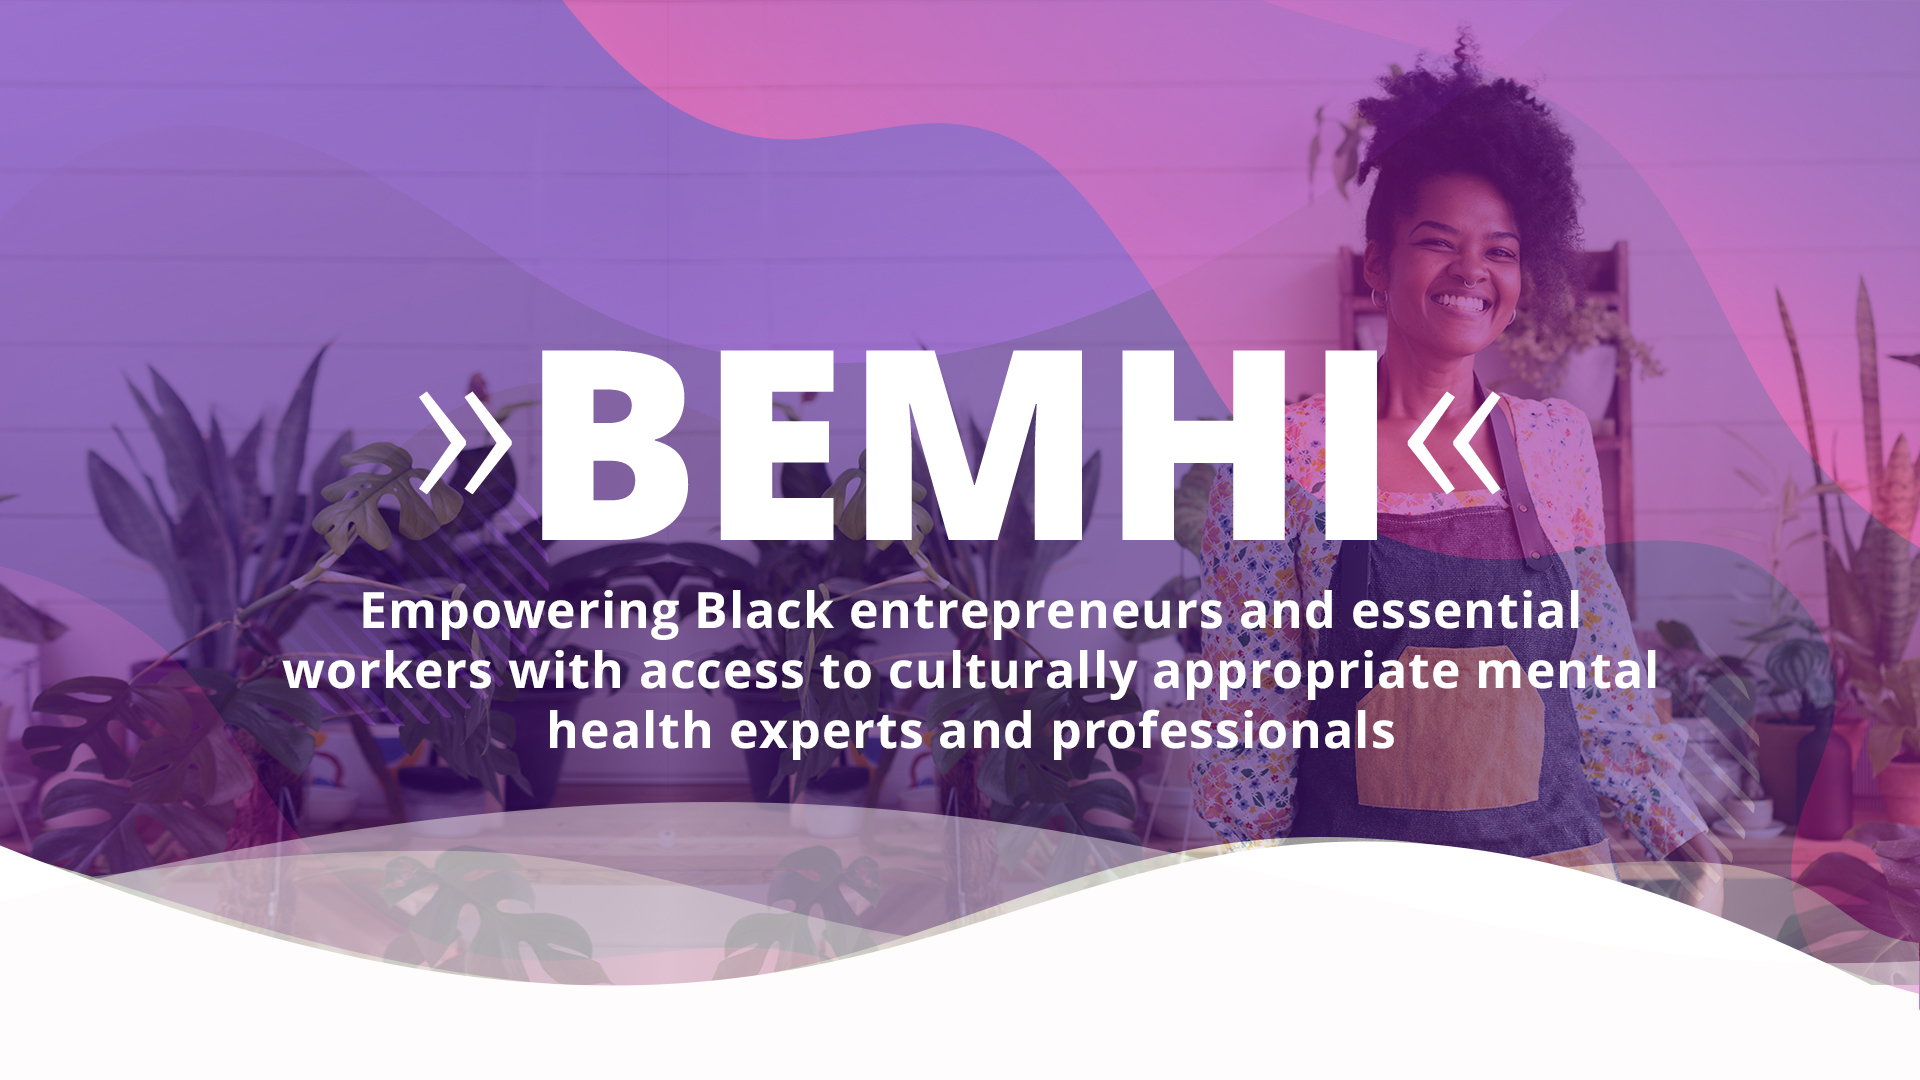 Black Health Alliance & Innovate Inclusion partner to connect 200 Essential Workers to Culturally Safe Mental Health Care